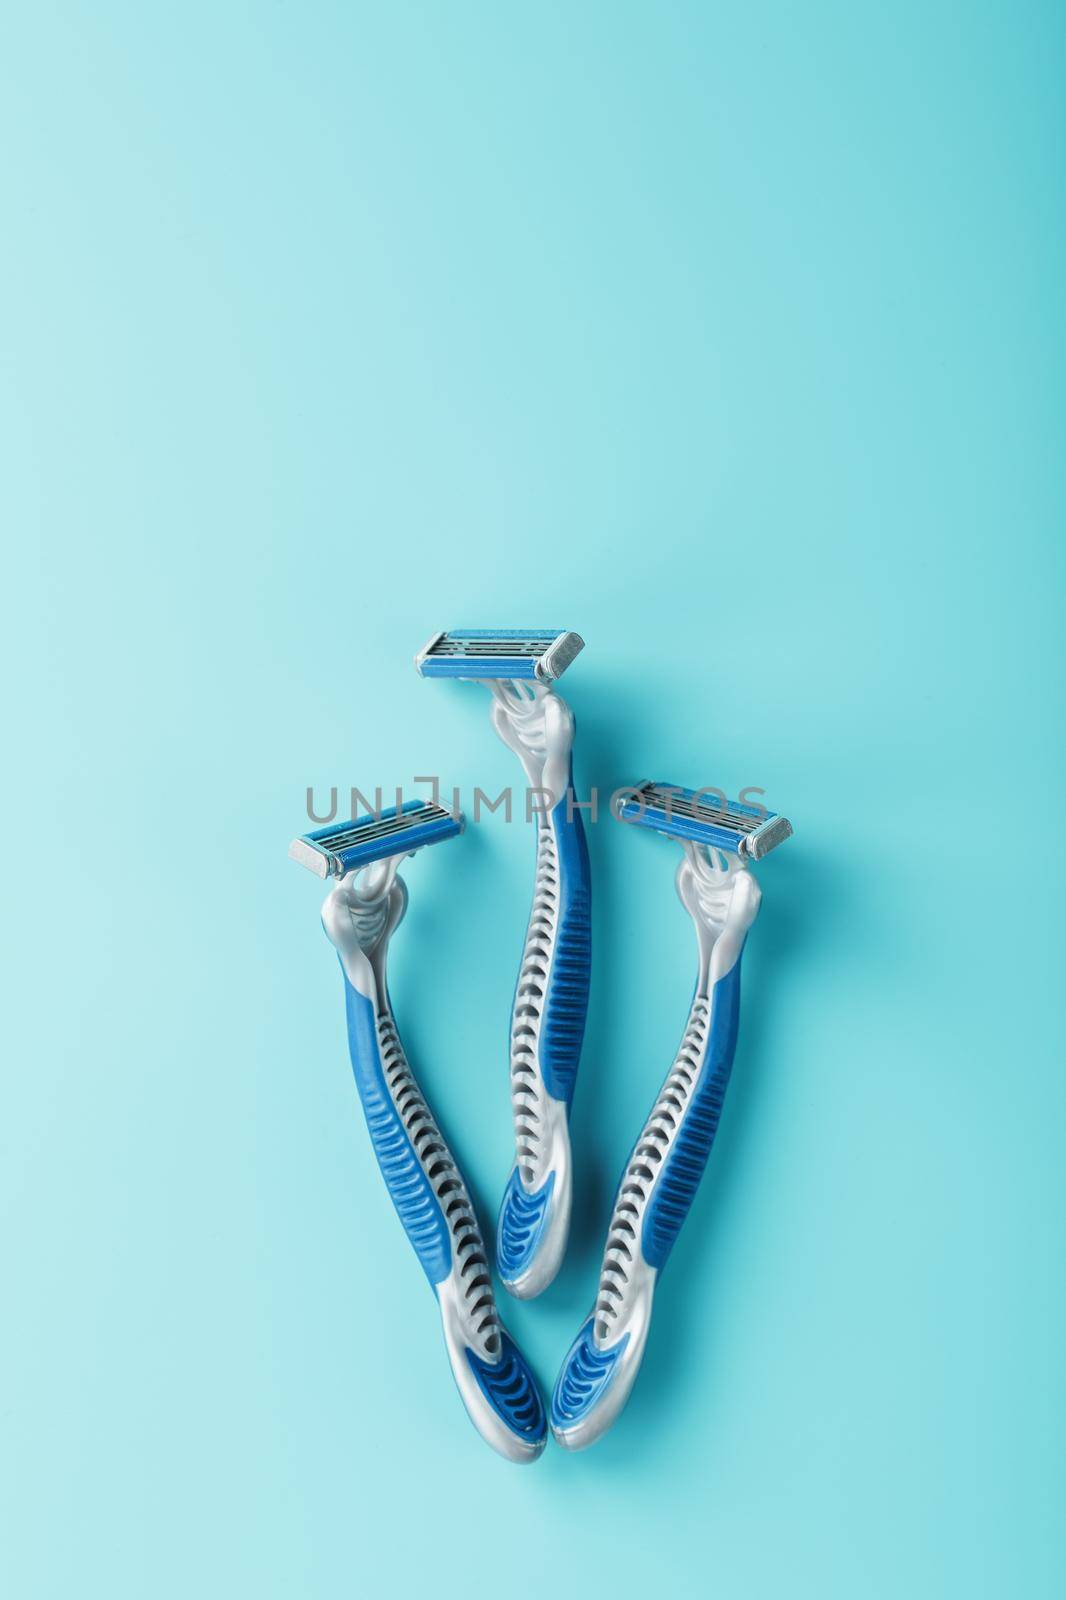 Three shaving machines on a blue background with free space, top view